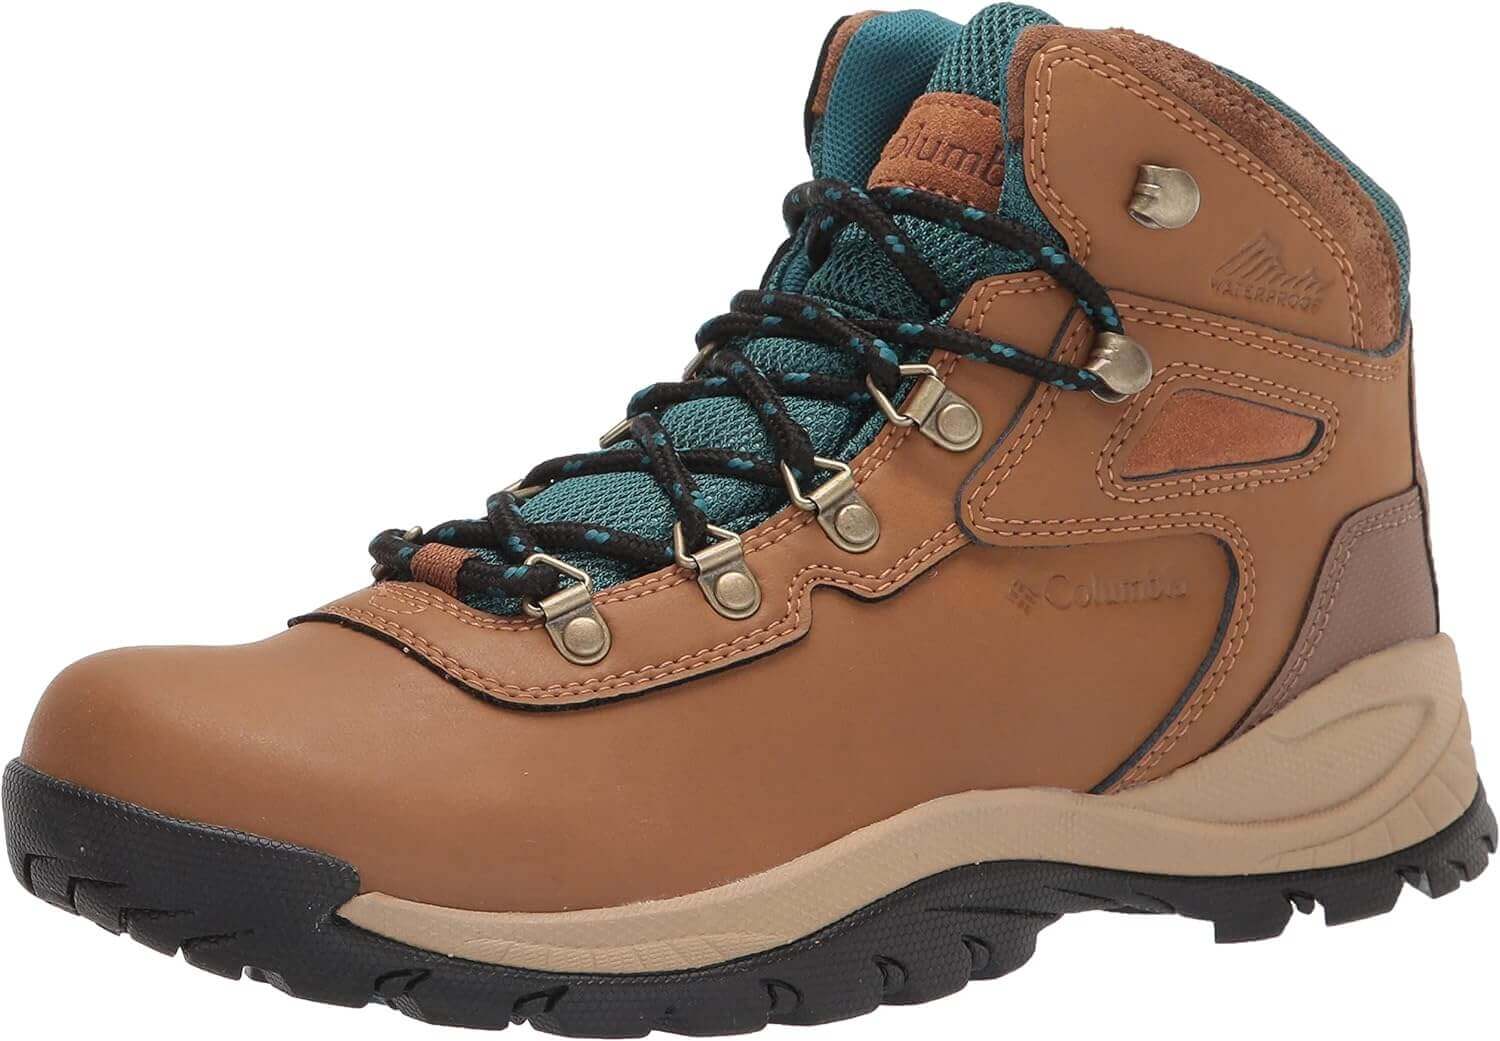 Shop The Latest >Columbia Women's Newton Ridge Waterproof Hiking Boot > *Only $134.99*> From The Top Brand > *Columbial* > Shop Now and Get Free Shipping On Orders Over $45.00 >*Shop Earth Foot*